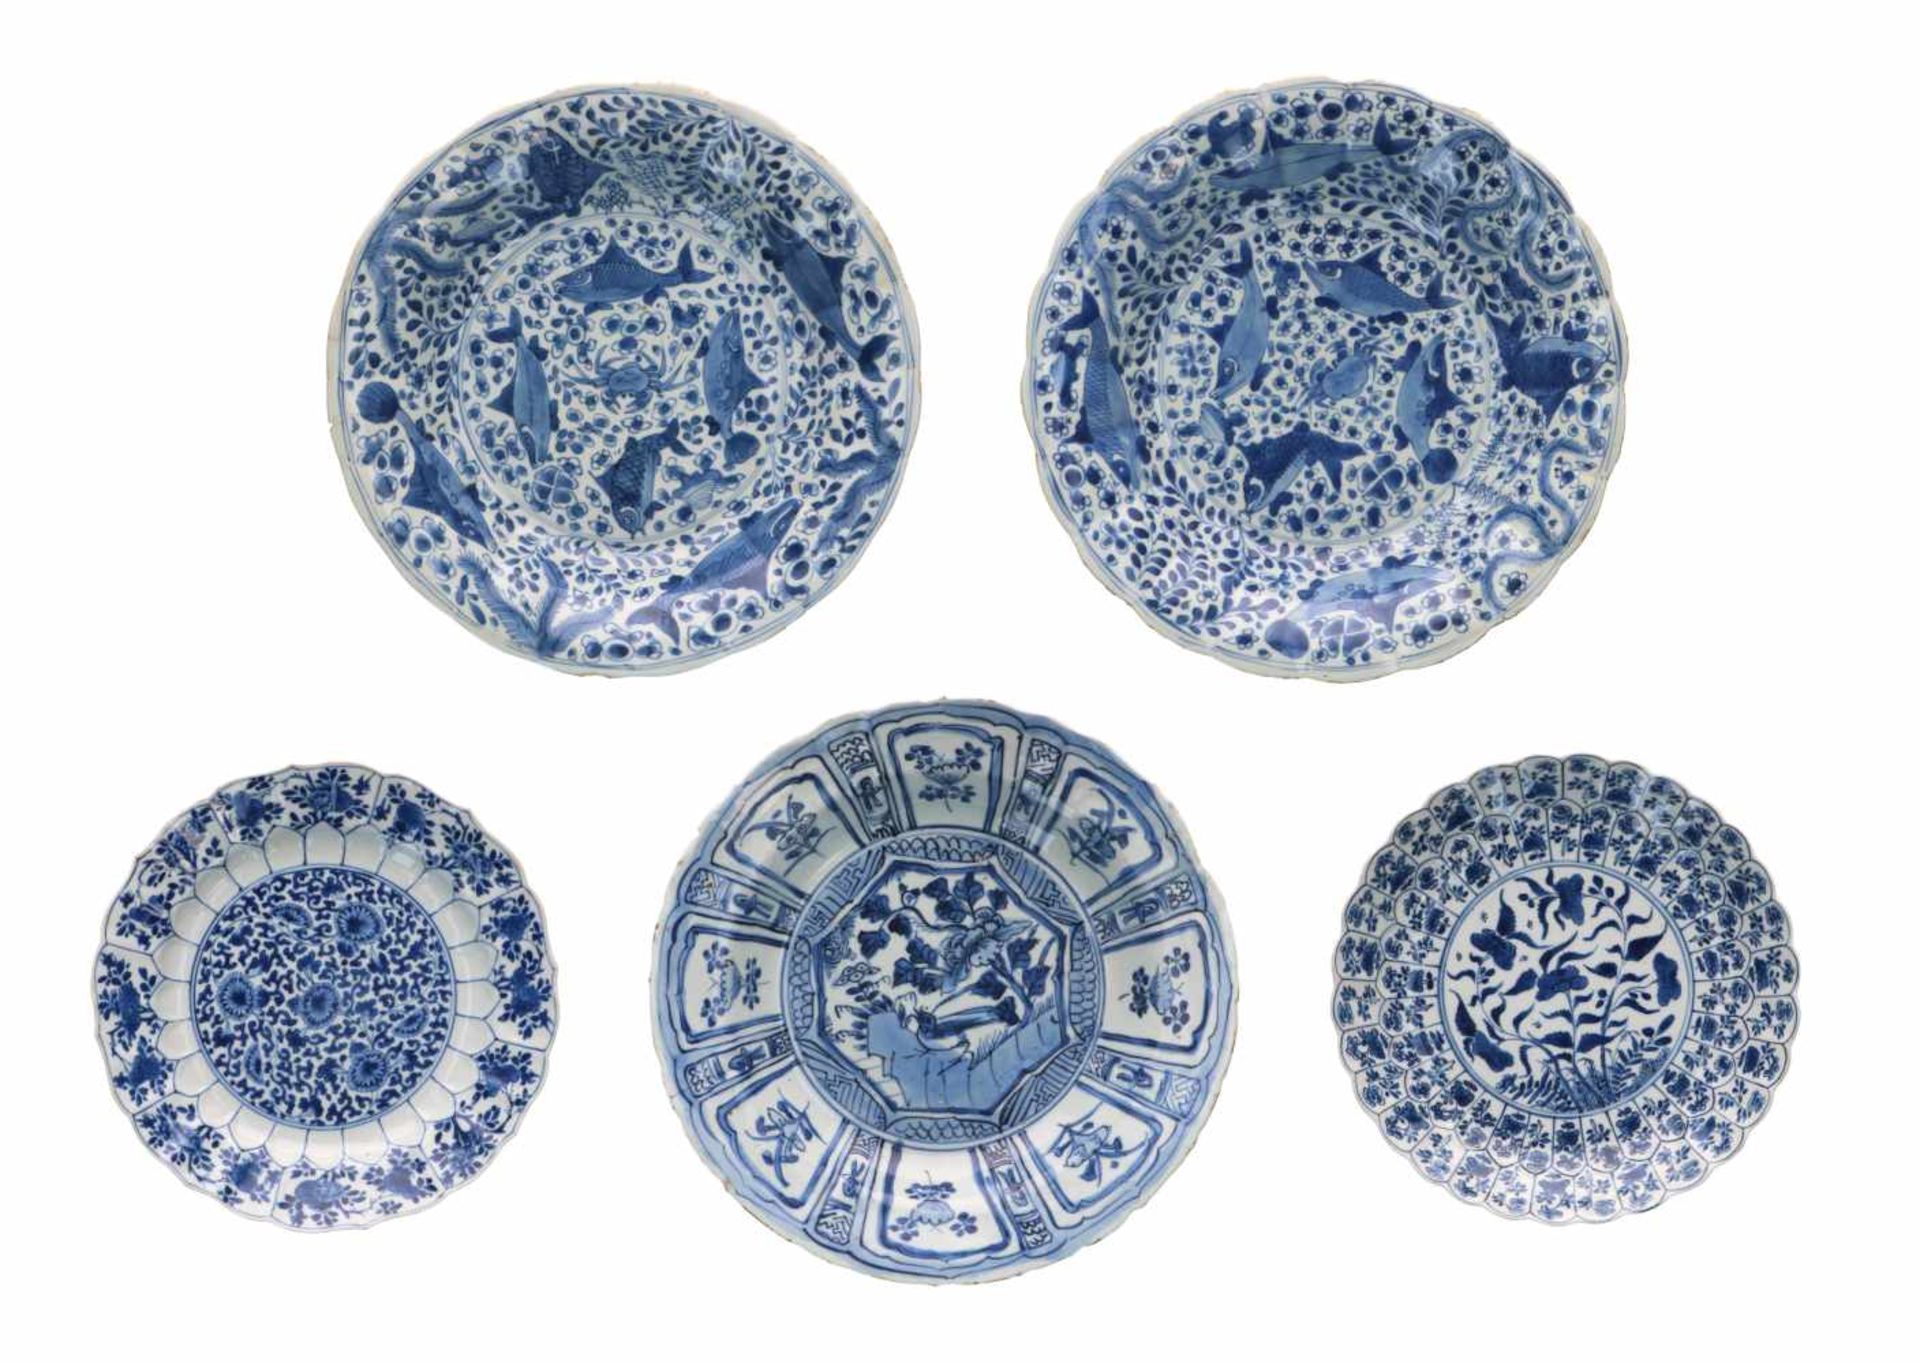 Lot of blue and white porcelain dishes, 1) with scalloped rim, decorated with flowers. Marked with